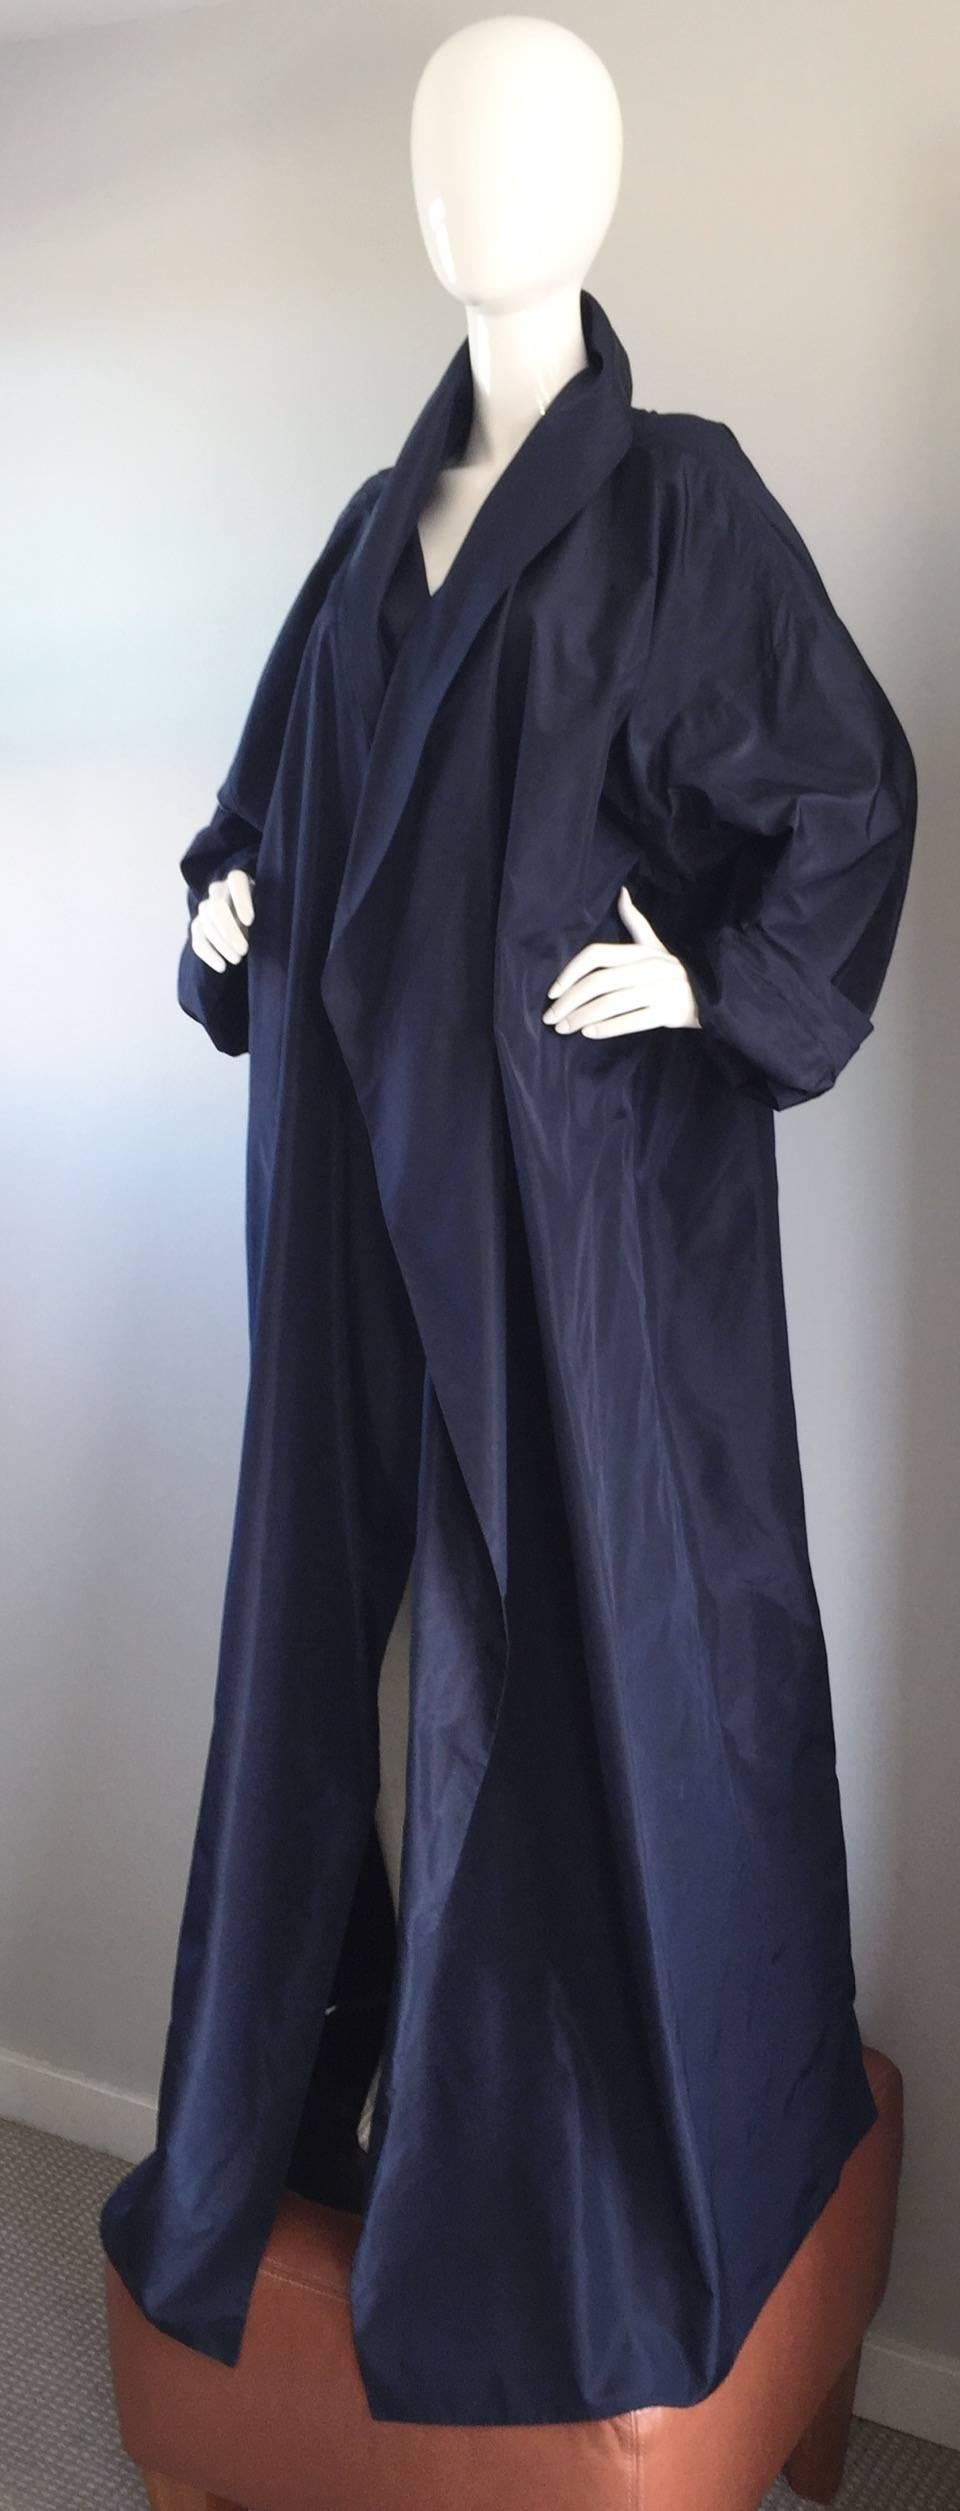 Dramatic vintage PAMELA DENNIS midnight blue silk opera jacket! Incredible amount of volume, featuring a shawl collar. The finest of silks was used on this couture beauty. Functional pockets at both sides of the waist. Hangs perfectly over the body.